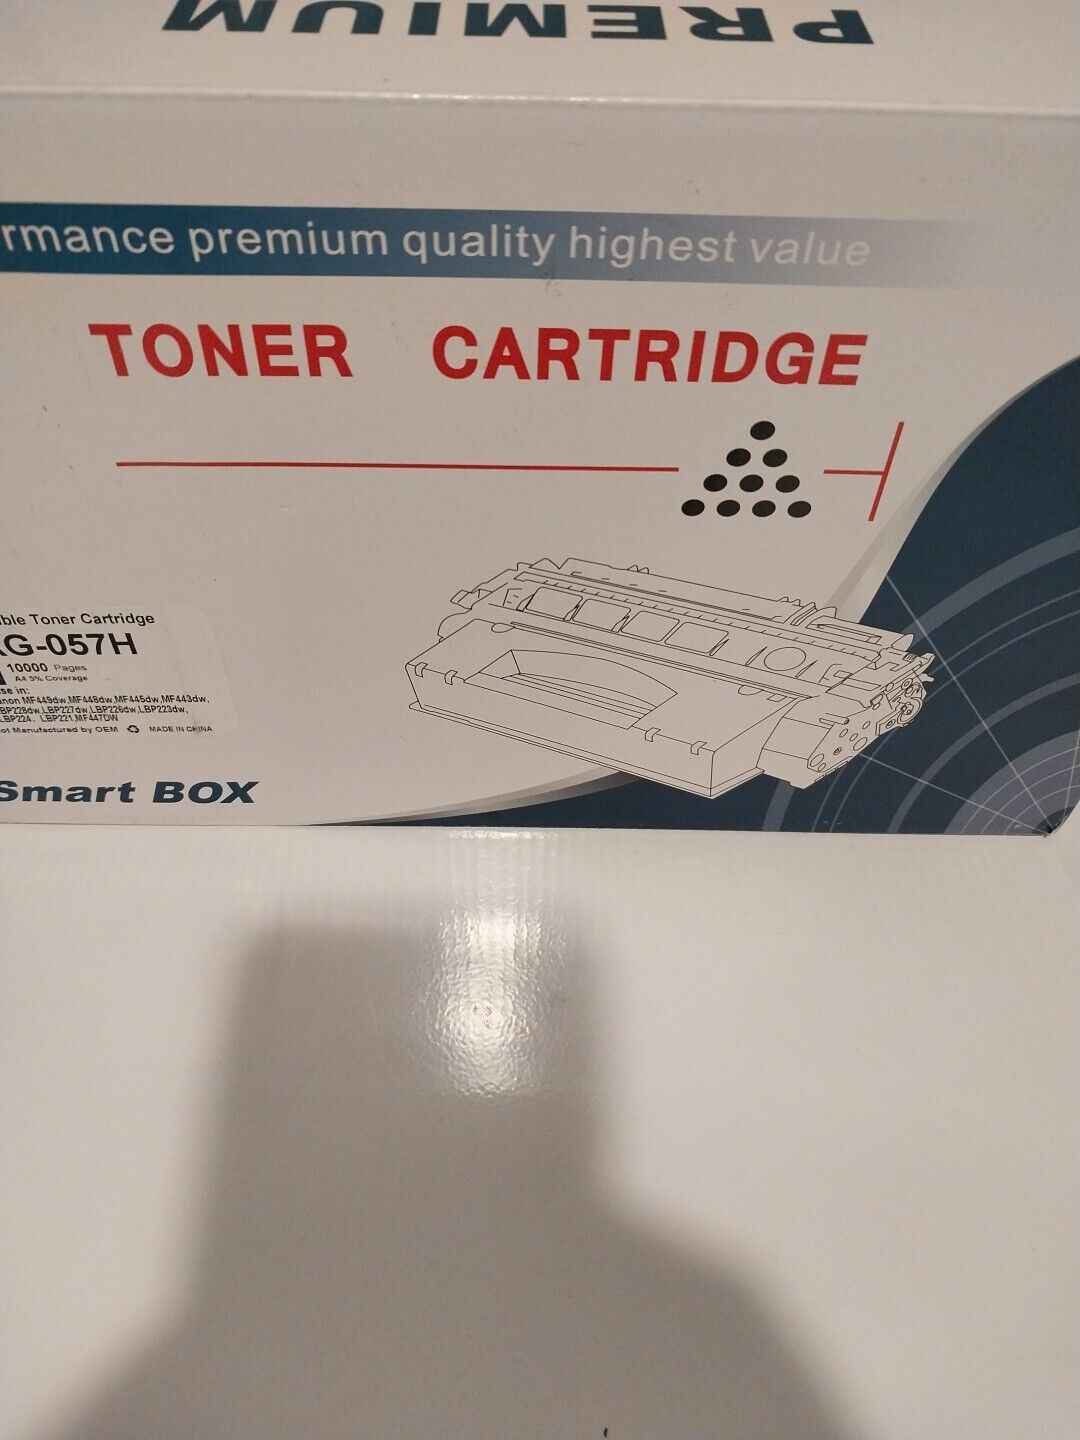  SMART BOX CRG-057H Toner Cartridge REPLACEMENT for Canon